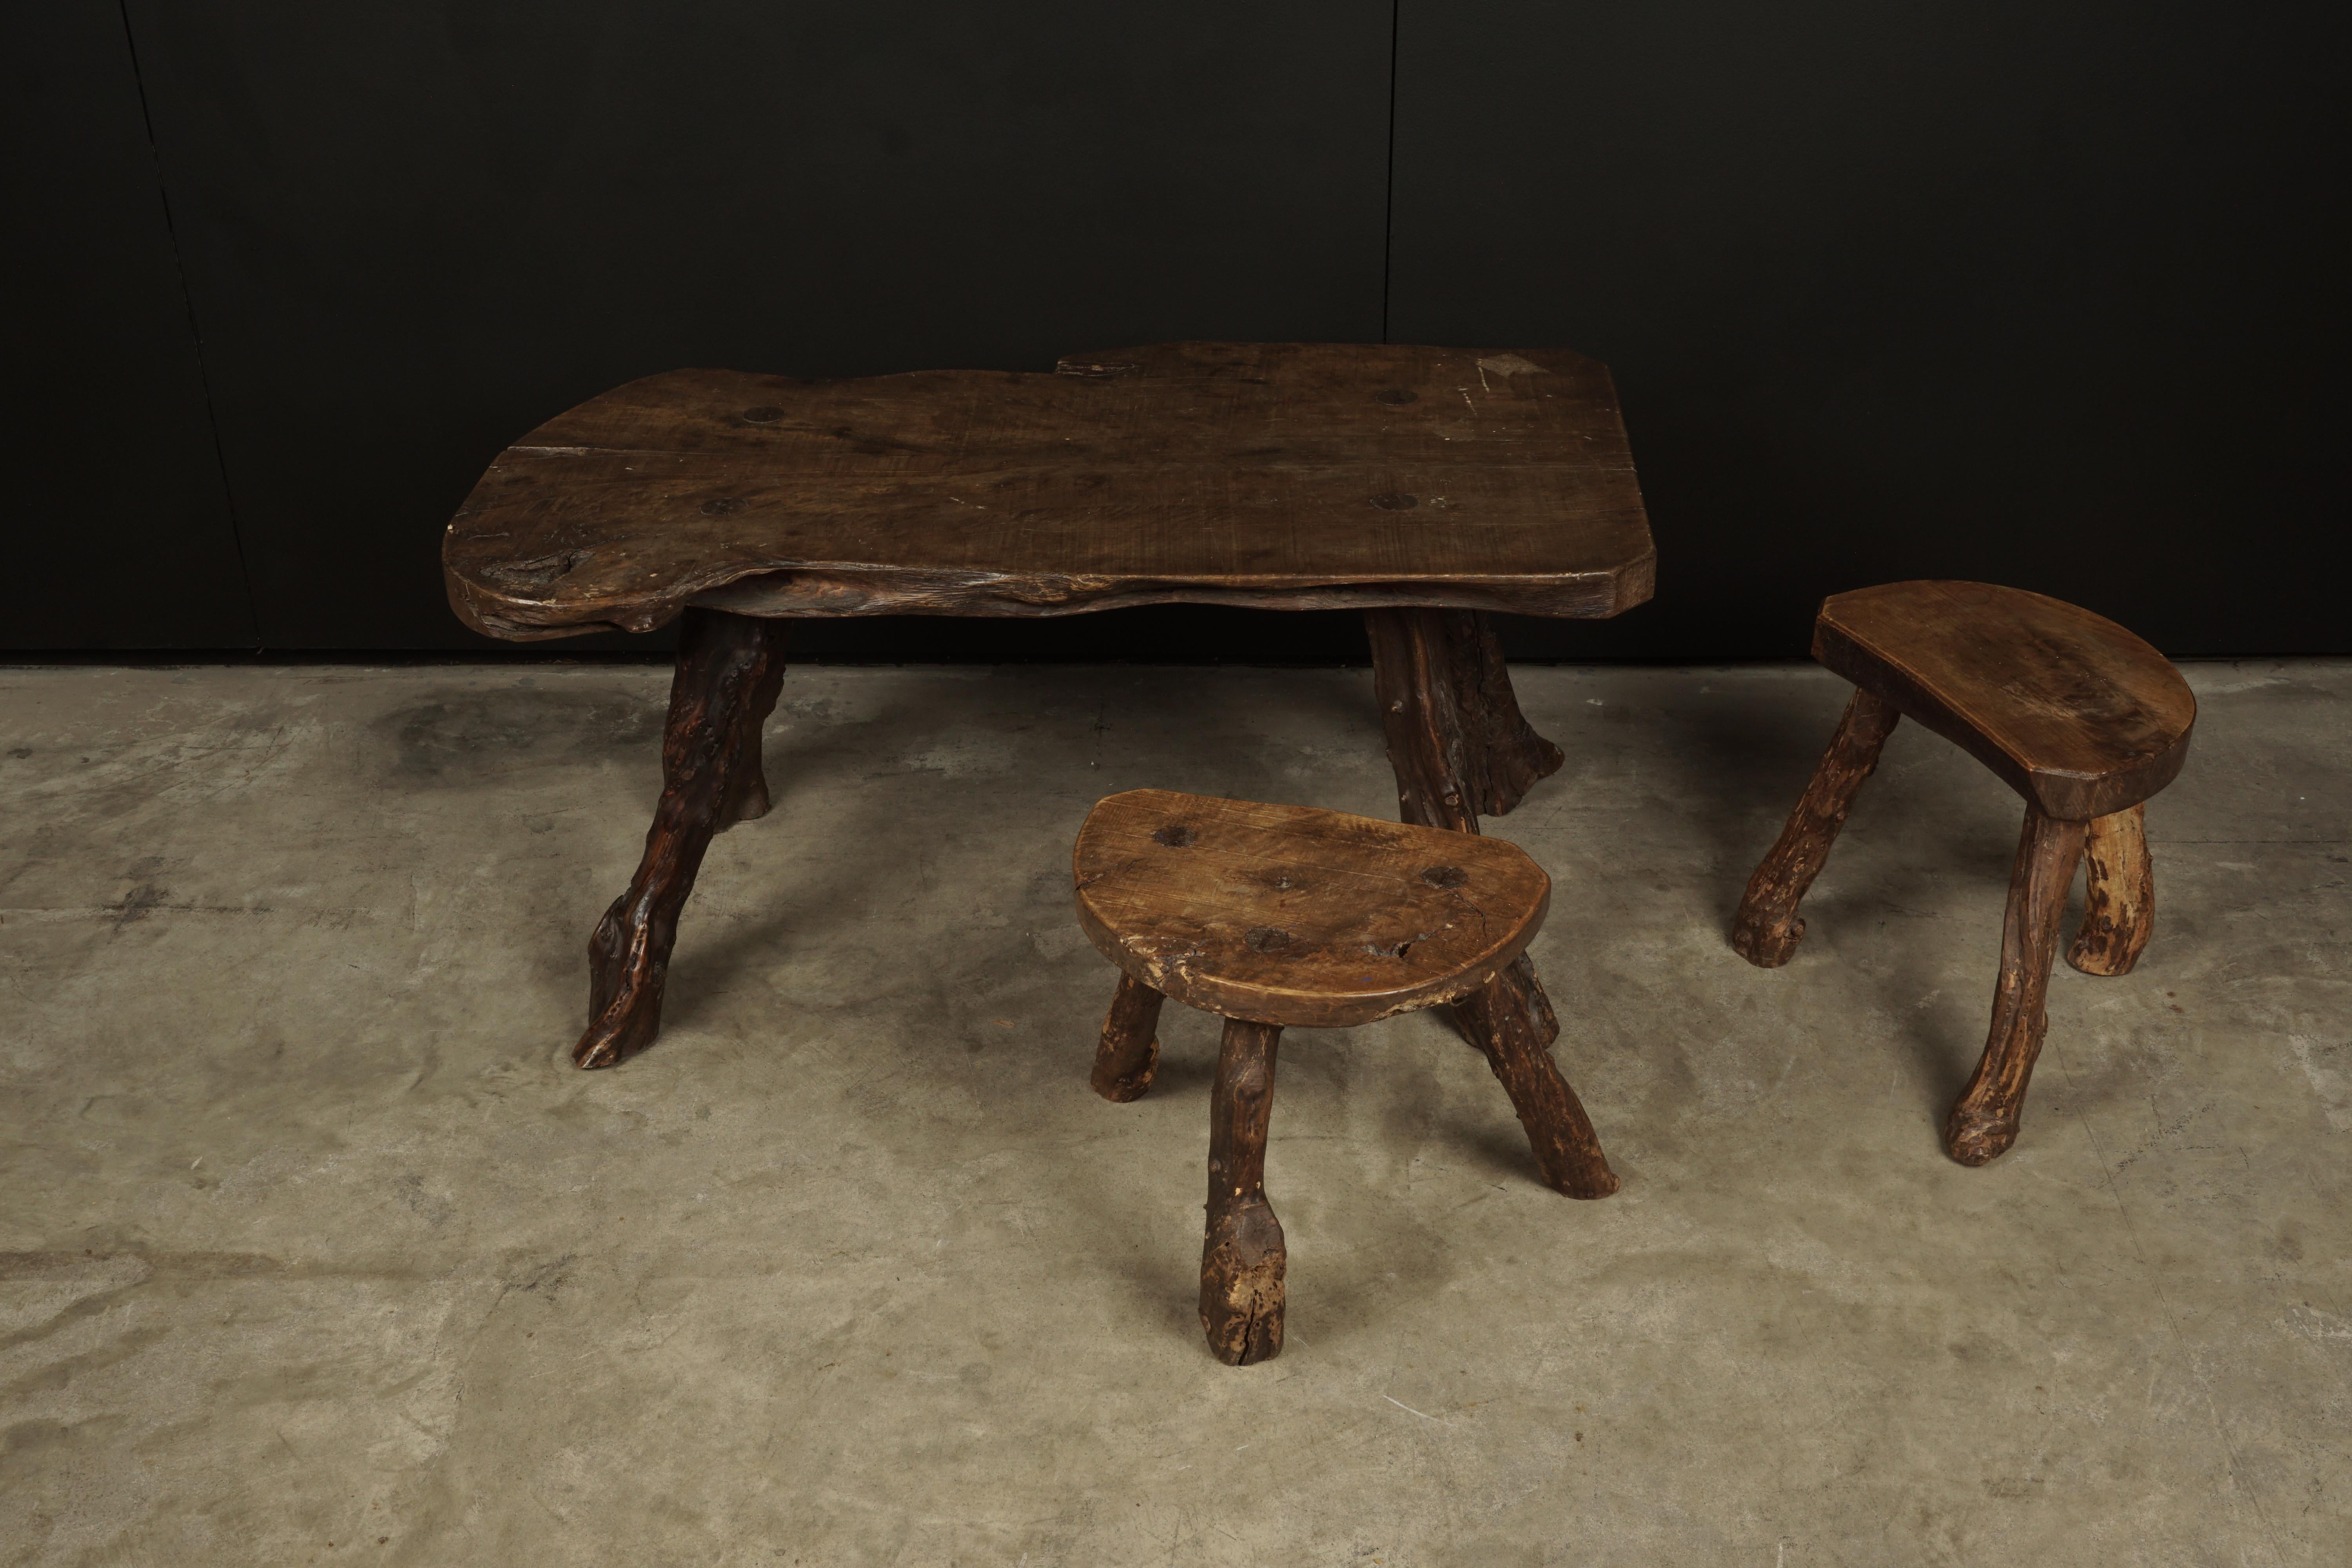 Primitive coffee table set with stools from France, 1960s. Light wear and patina.

Dims on the stools:
H. 13.5
W. 14
D. 9.